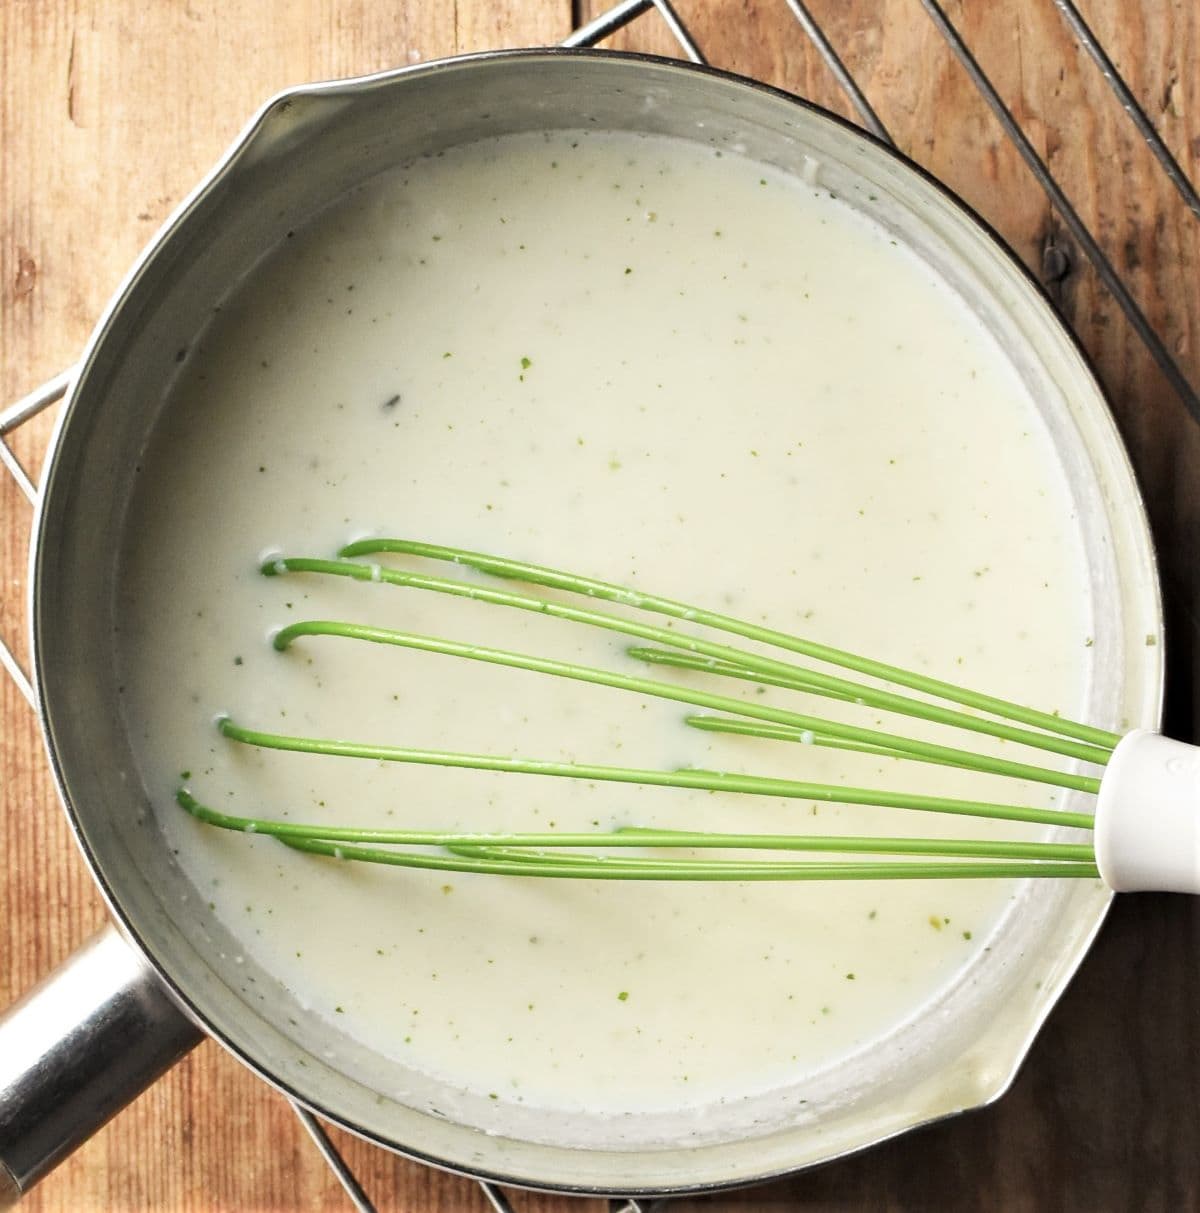 Making creamy sauce for chicken pasta bake in pan with green whisk.